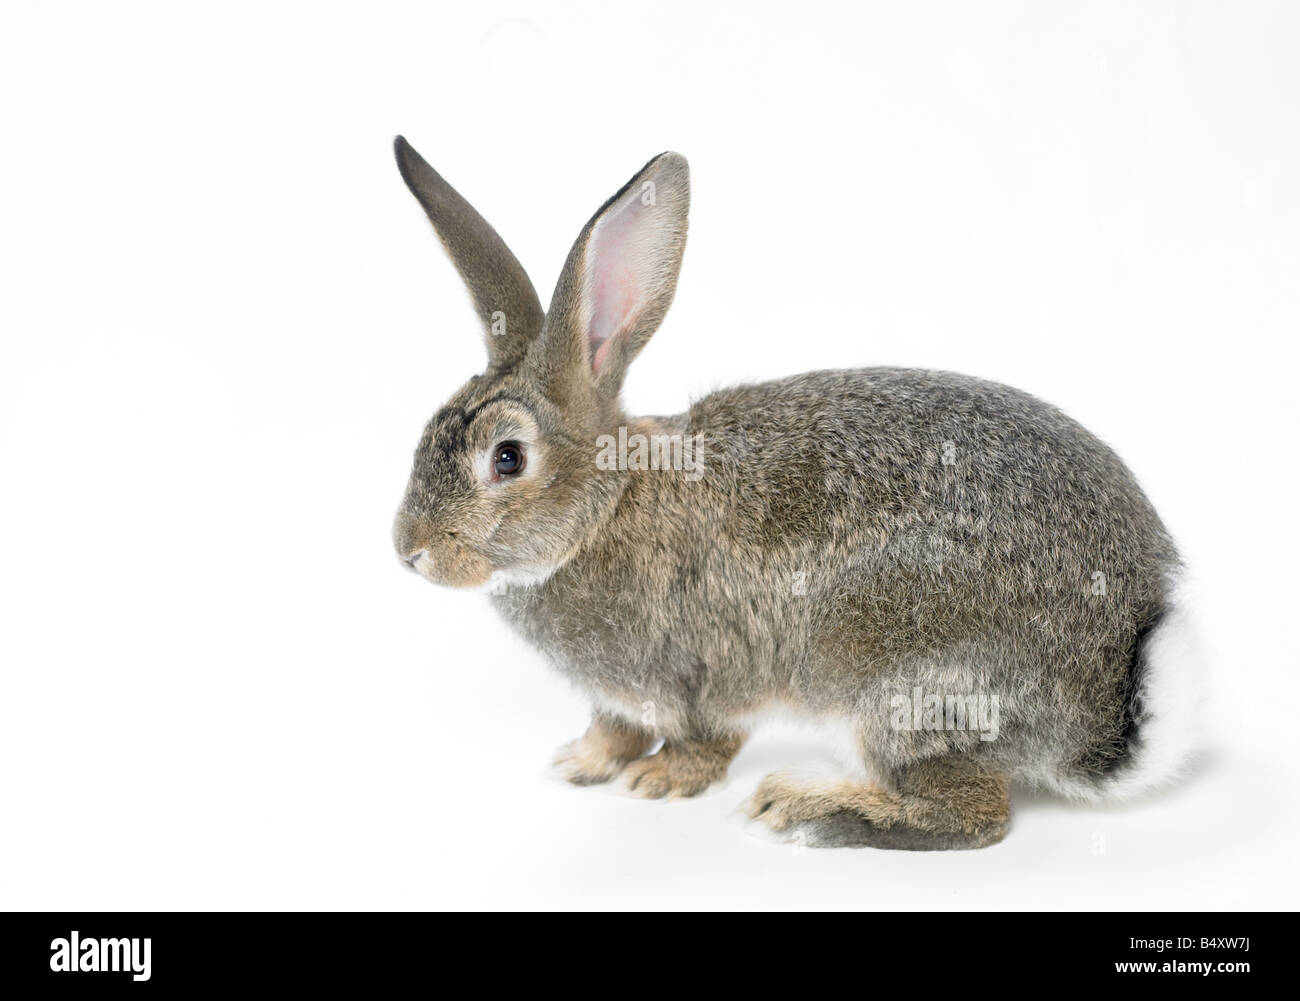 Cottontail rabbit Cut Out Stock Images & Pictures - Alamy